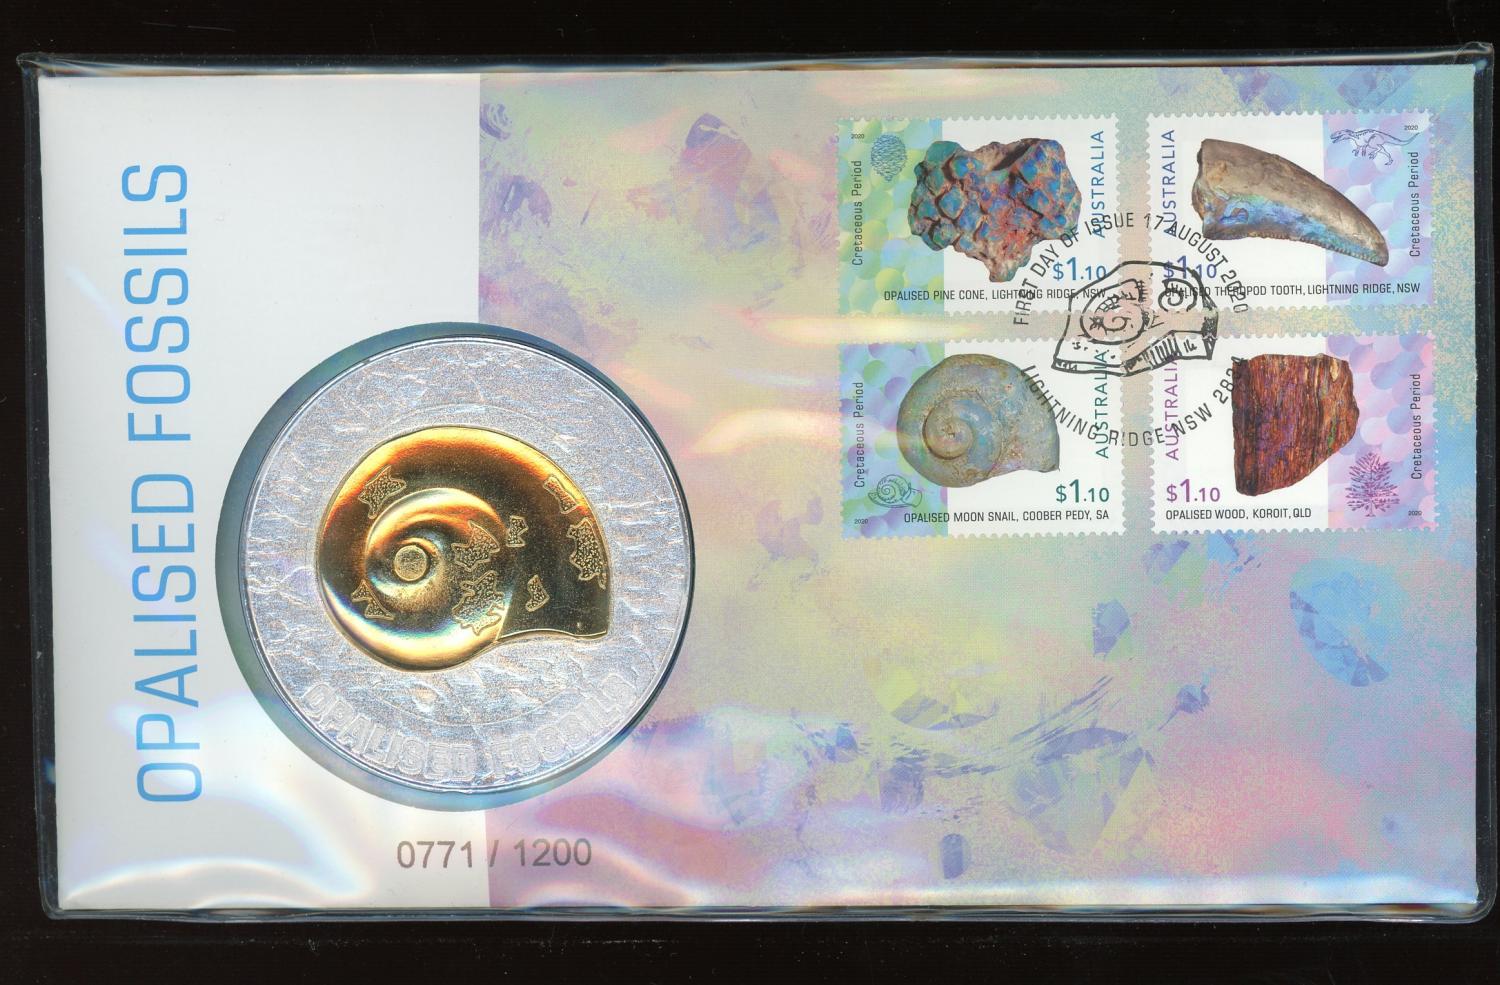 Thumbnail for 2020 Opalised Fossils Medallic PNC 0771 - 1200